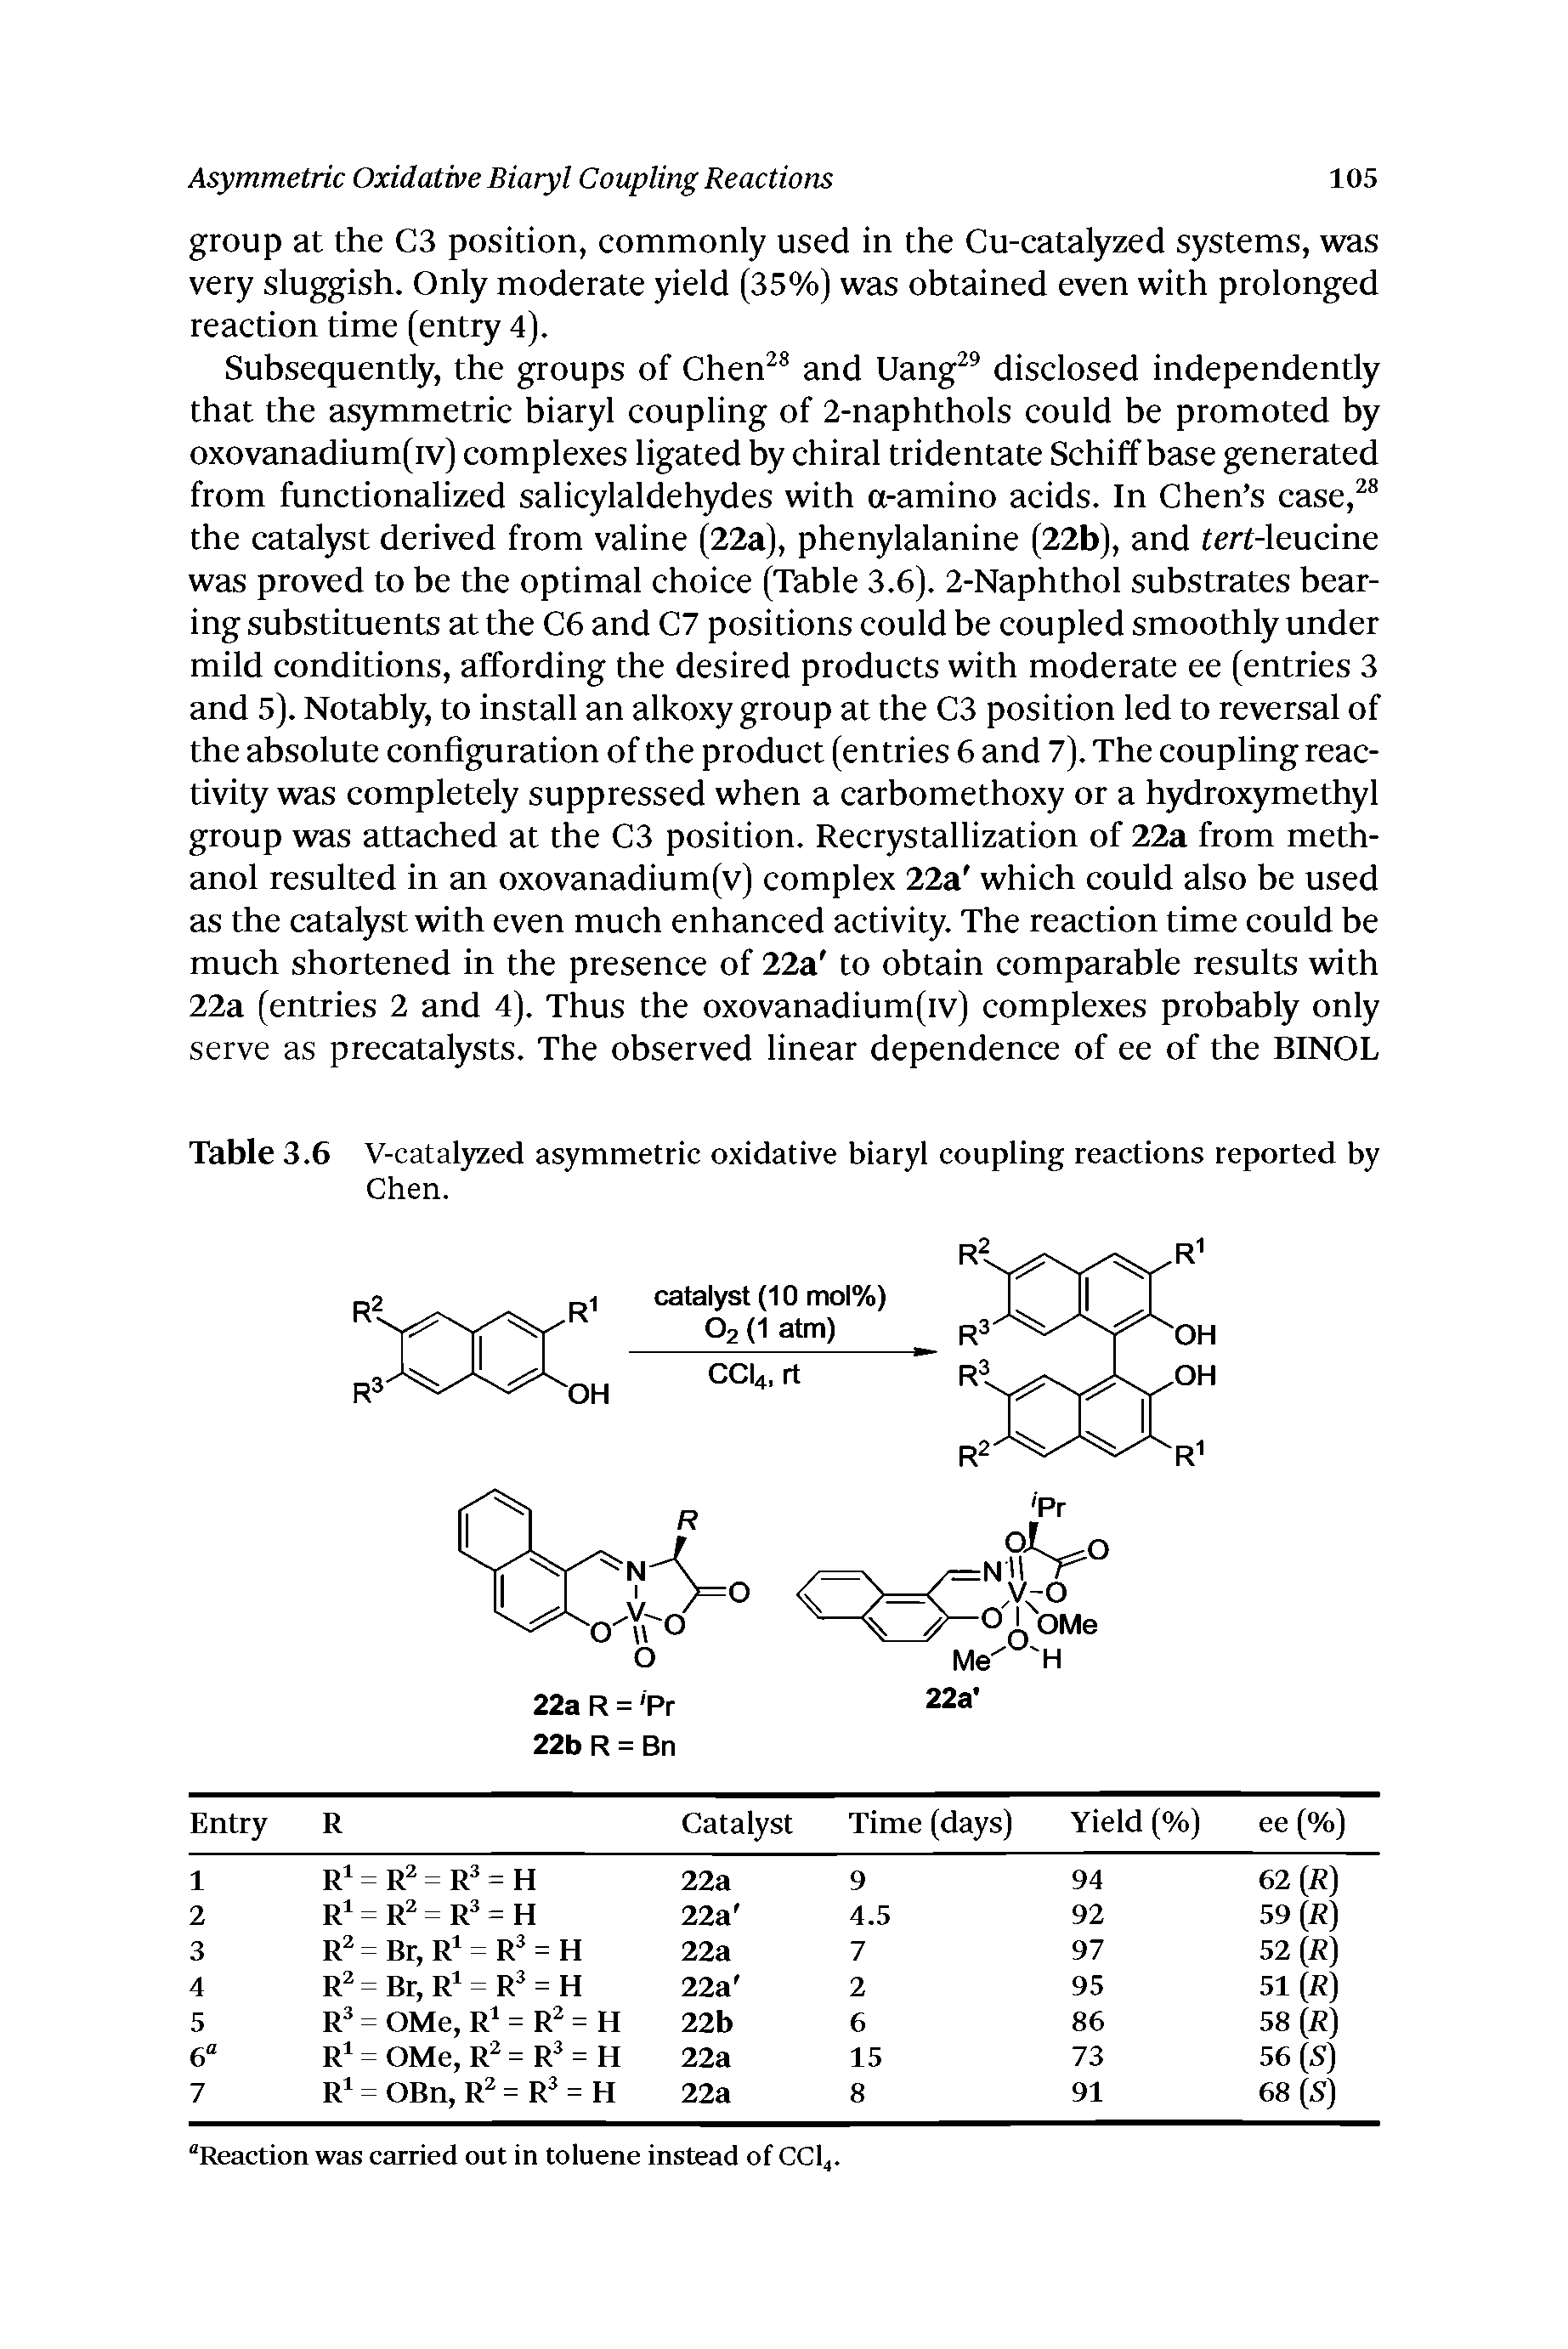 Table 3.6 V-catalyzed asymmetric oxidative biaryl coupling reactions reported by Chen.